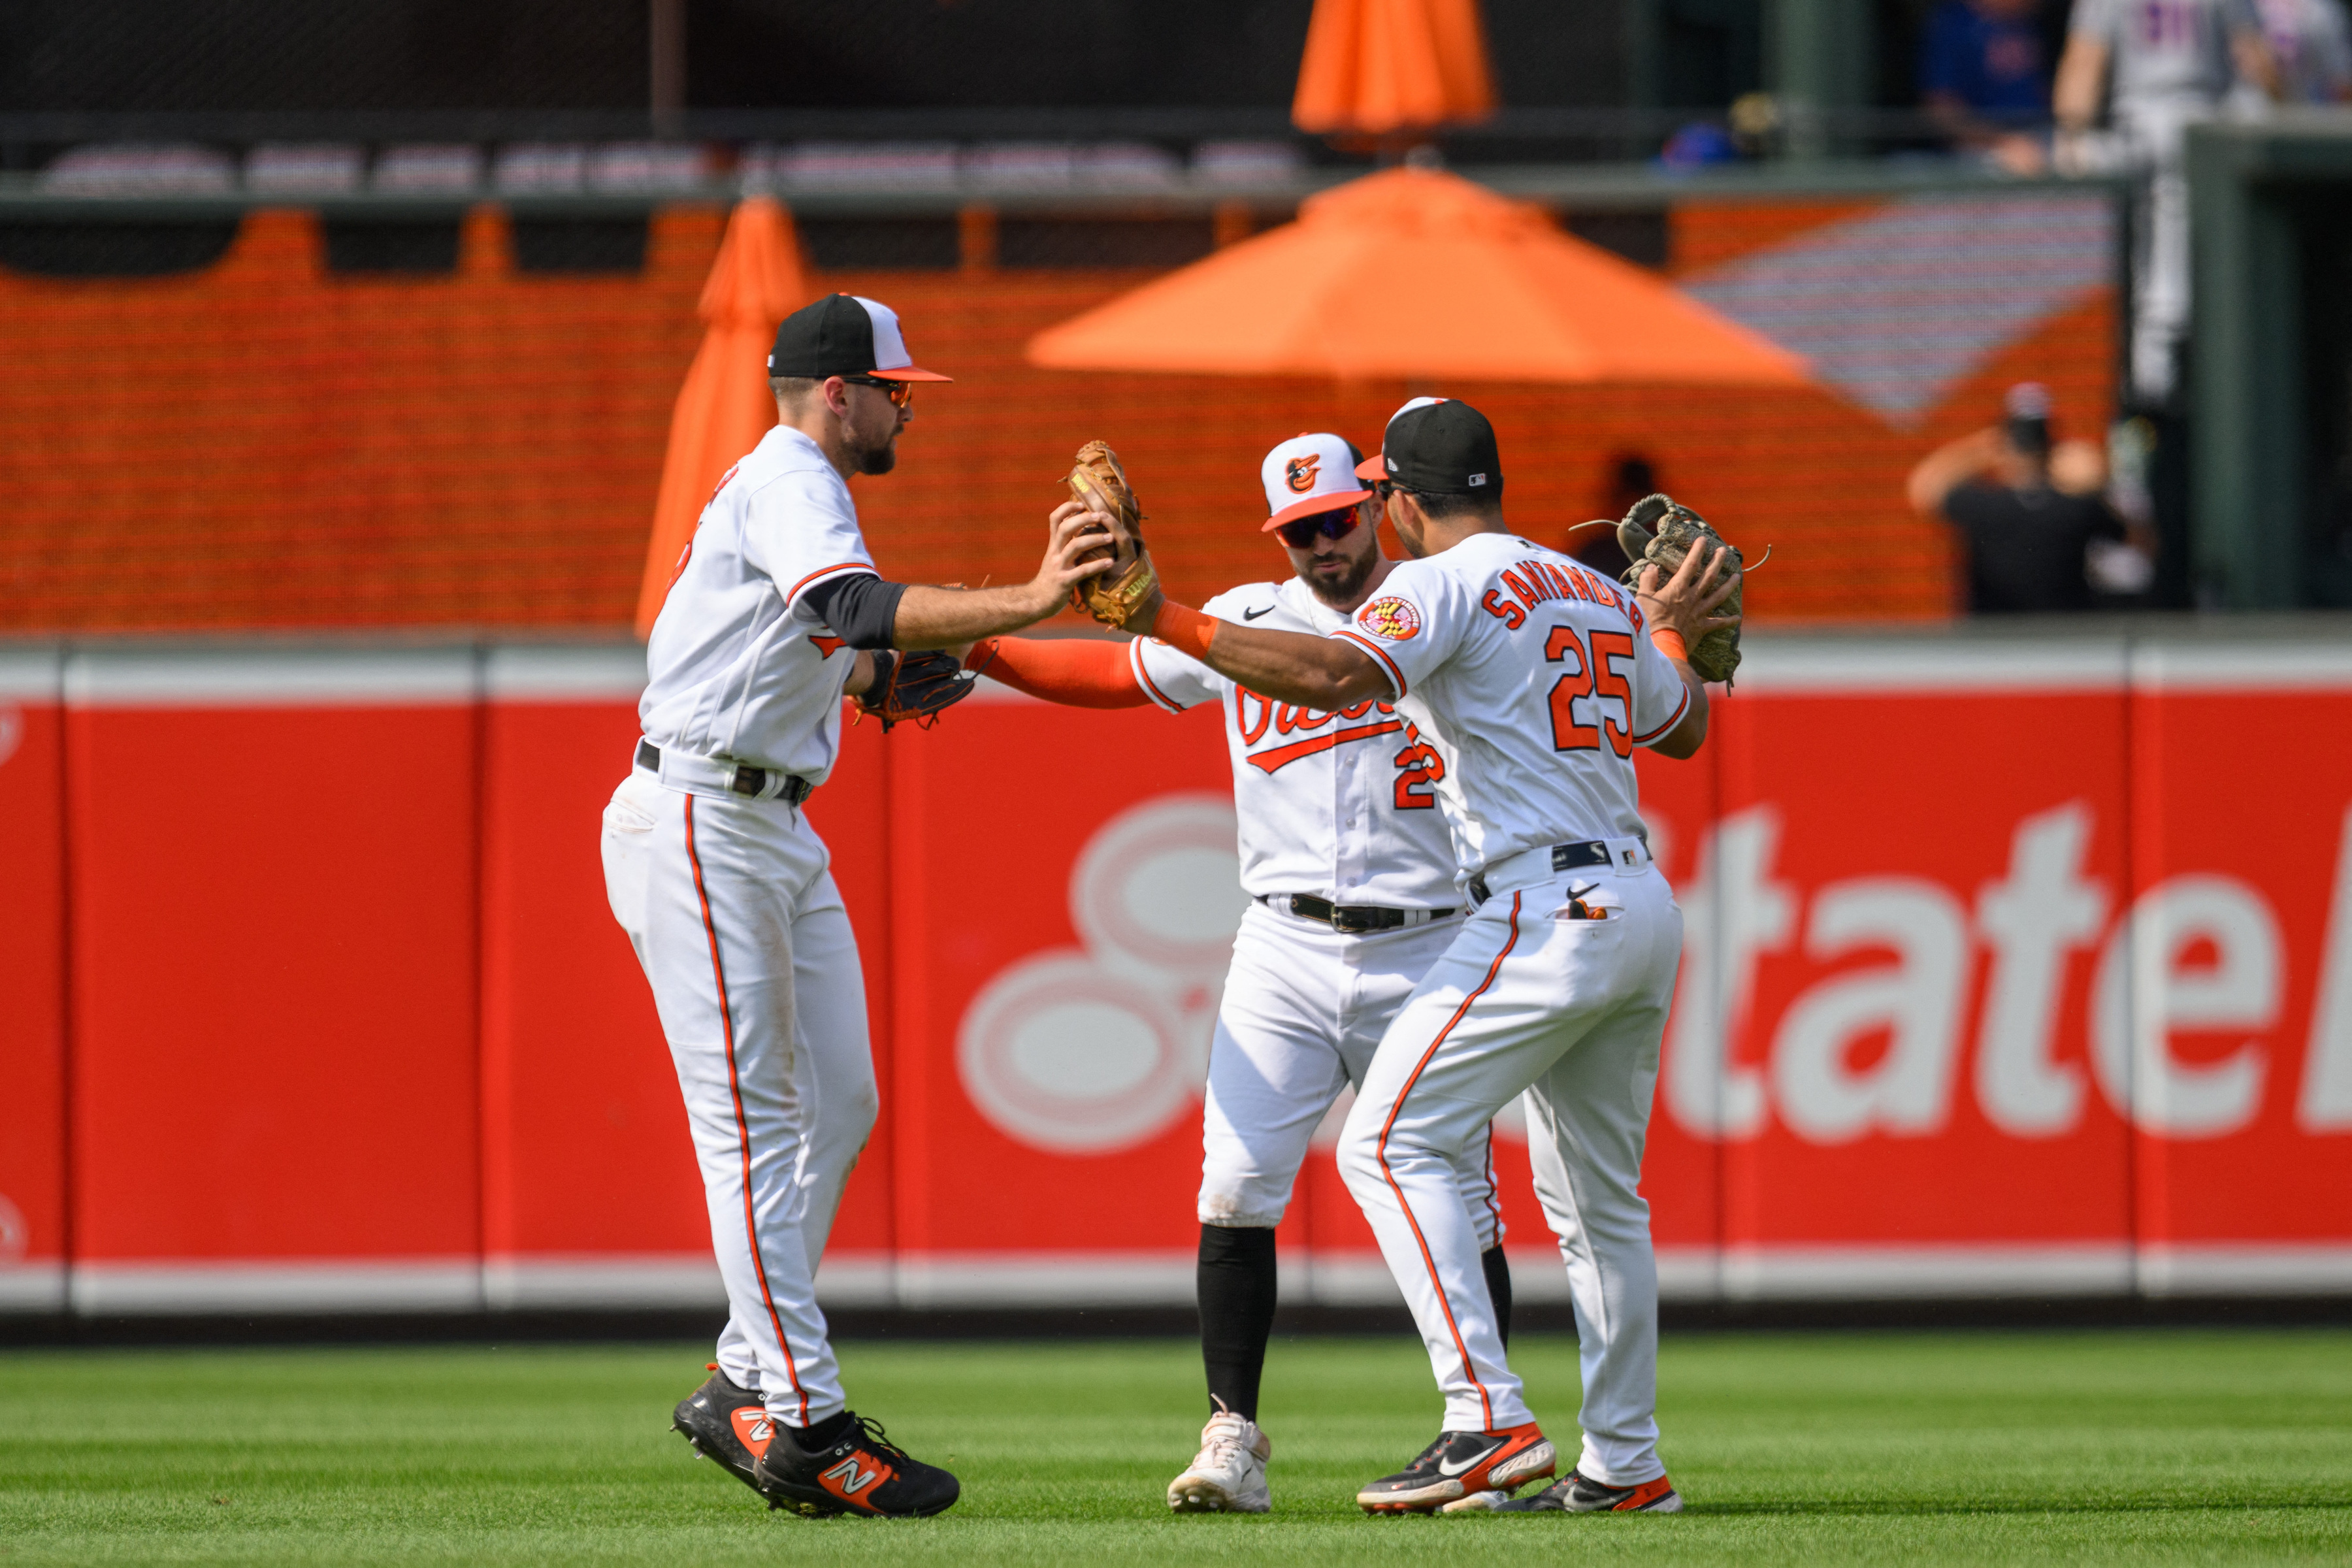 Orioles put away Mets 2-0 to finish sweep